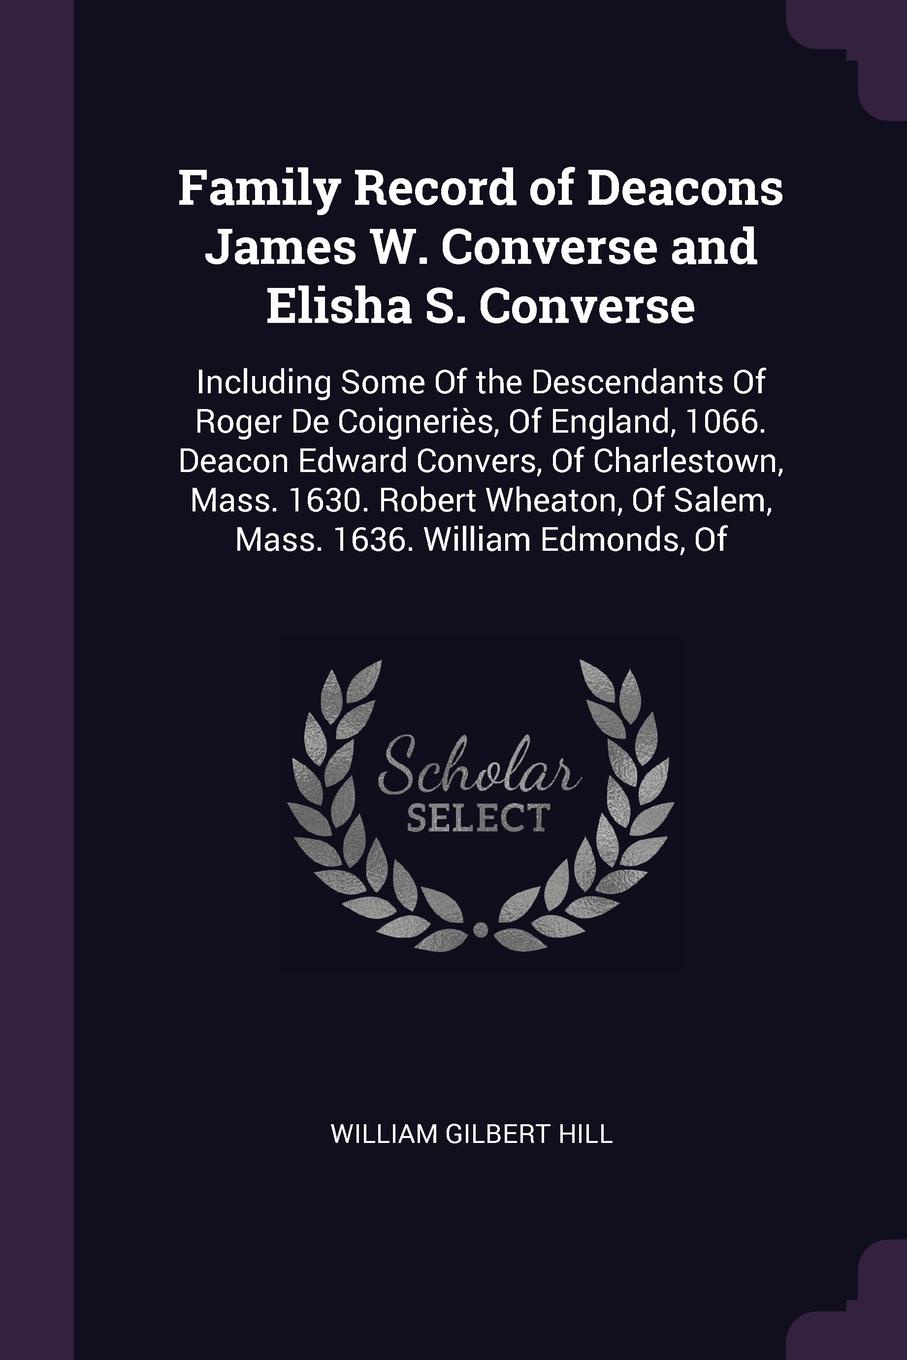 Family Record of Deacons James W. Converse and Elisha S. Converse. Including Some Of the Descendants Of Roger De Coigneries, Of England, 1066. Deacon Edward Convers, Of Charlestown, Mass. 1630. Robert Wheaton, Of Salem, Mass. 1636. William Edmonds...